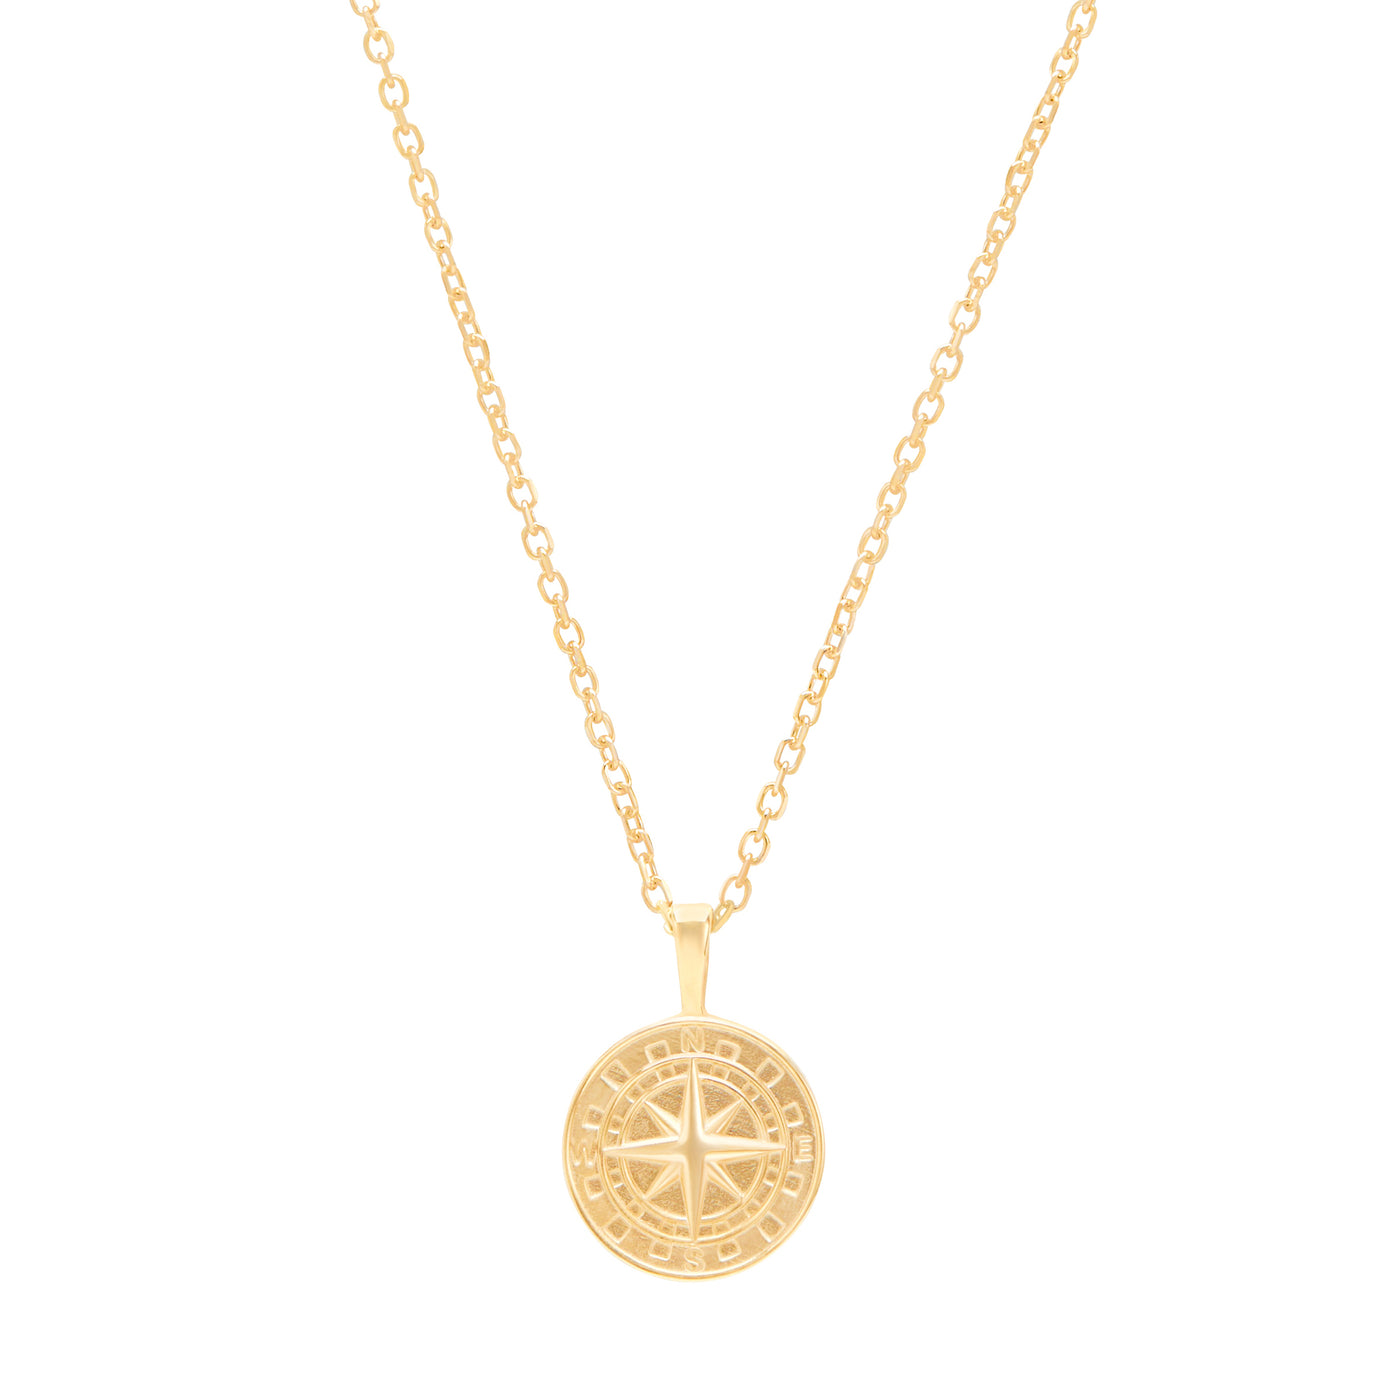 Compass pendant yellow gold on cable chain on white background